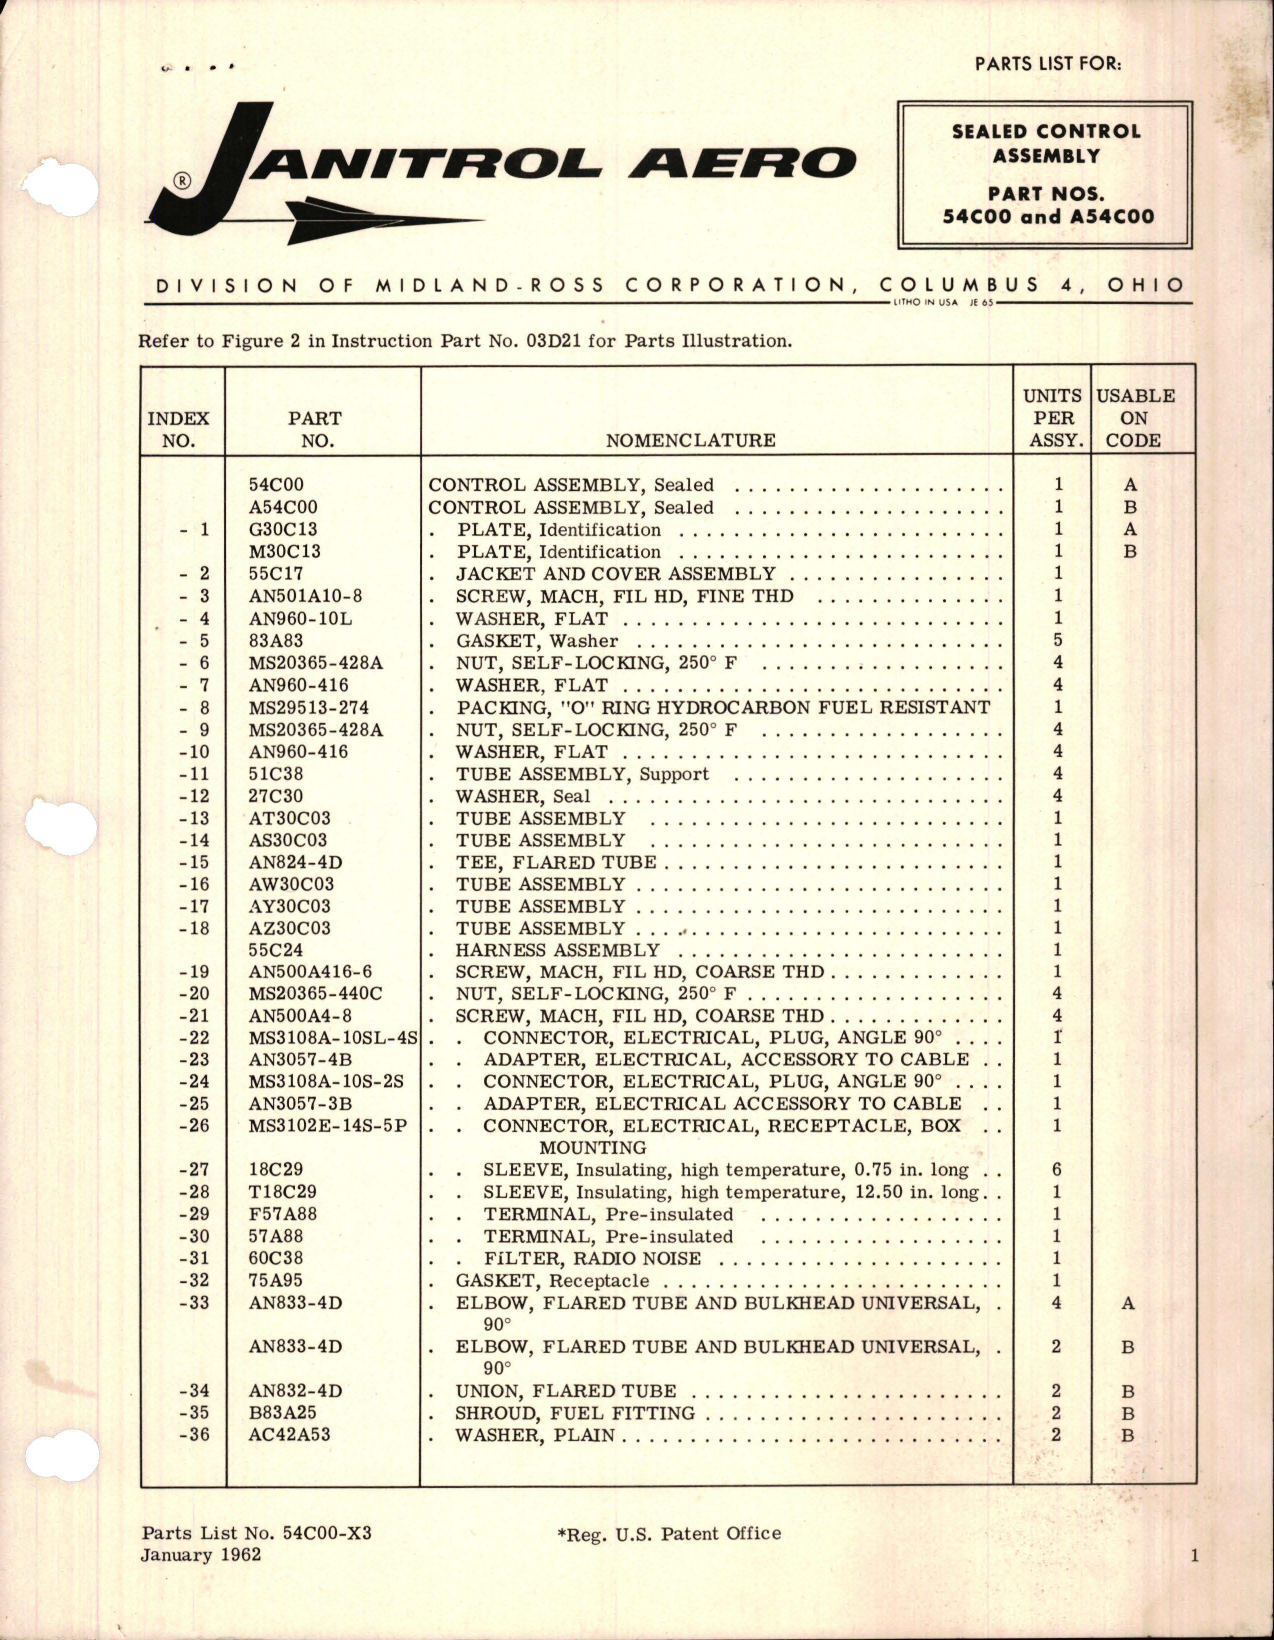 Sample page 1 from AirCorps Library document: Parts List for Sealed Control Assembly - Parts 54C00 and A54C00